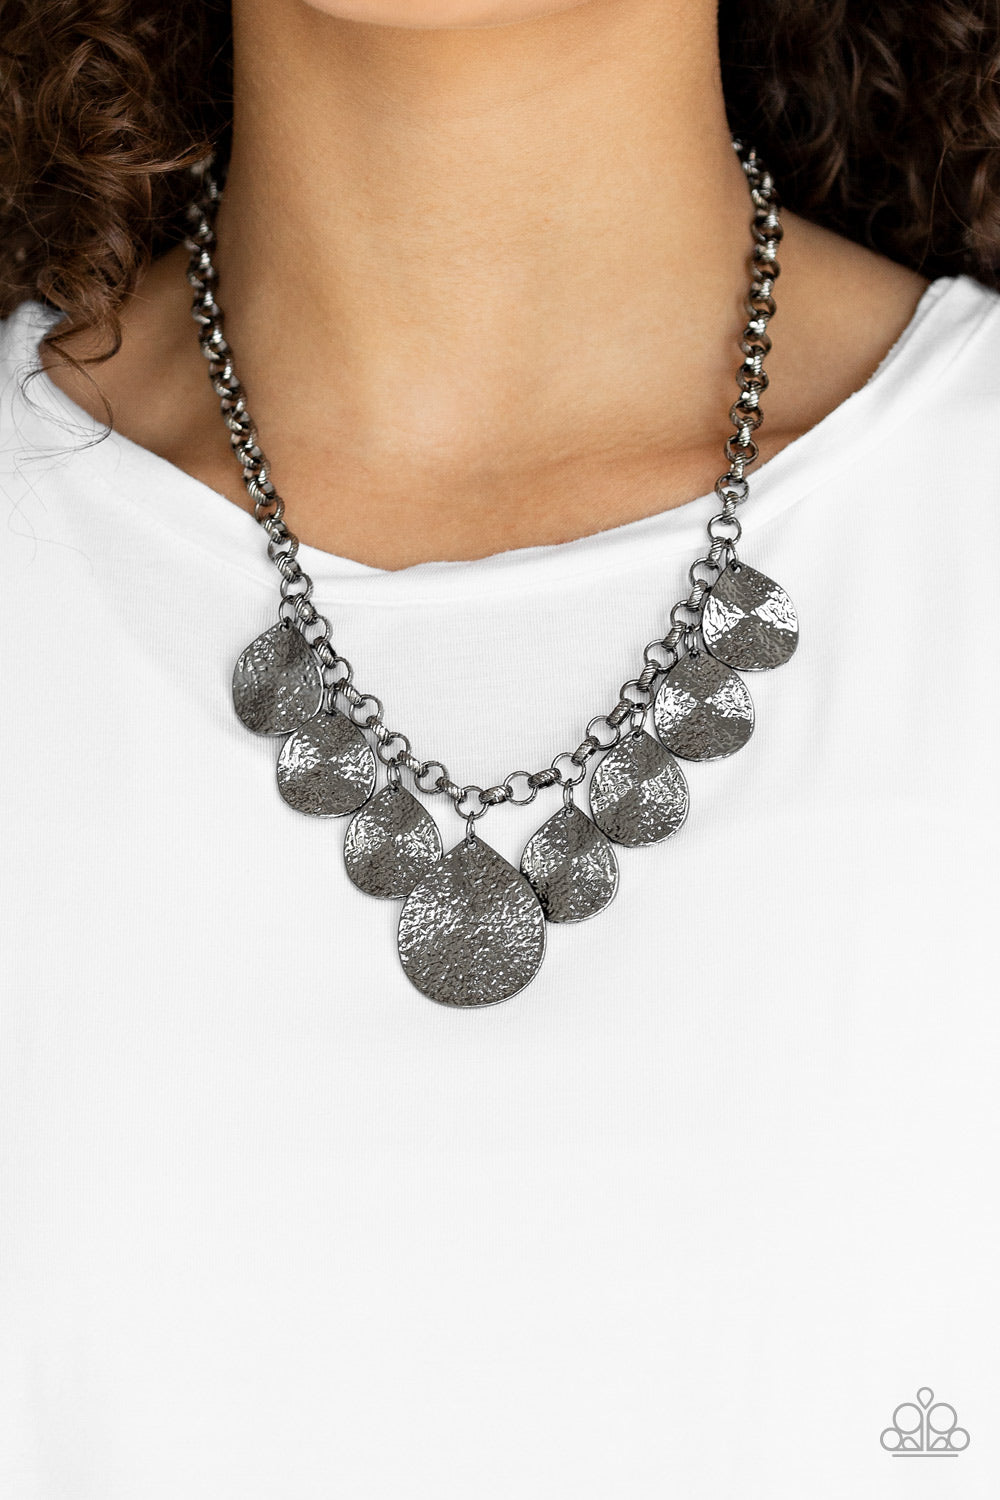 Texture Storm - Black Necklace - Pan-Che' Jewelry